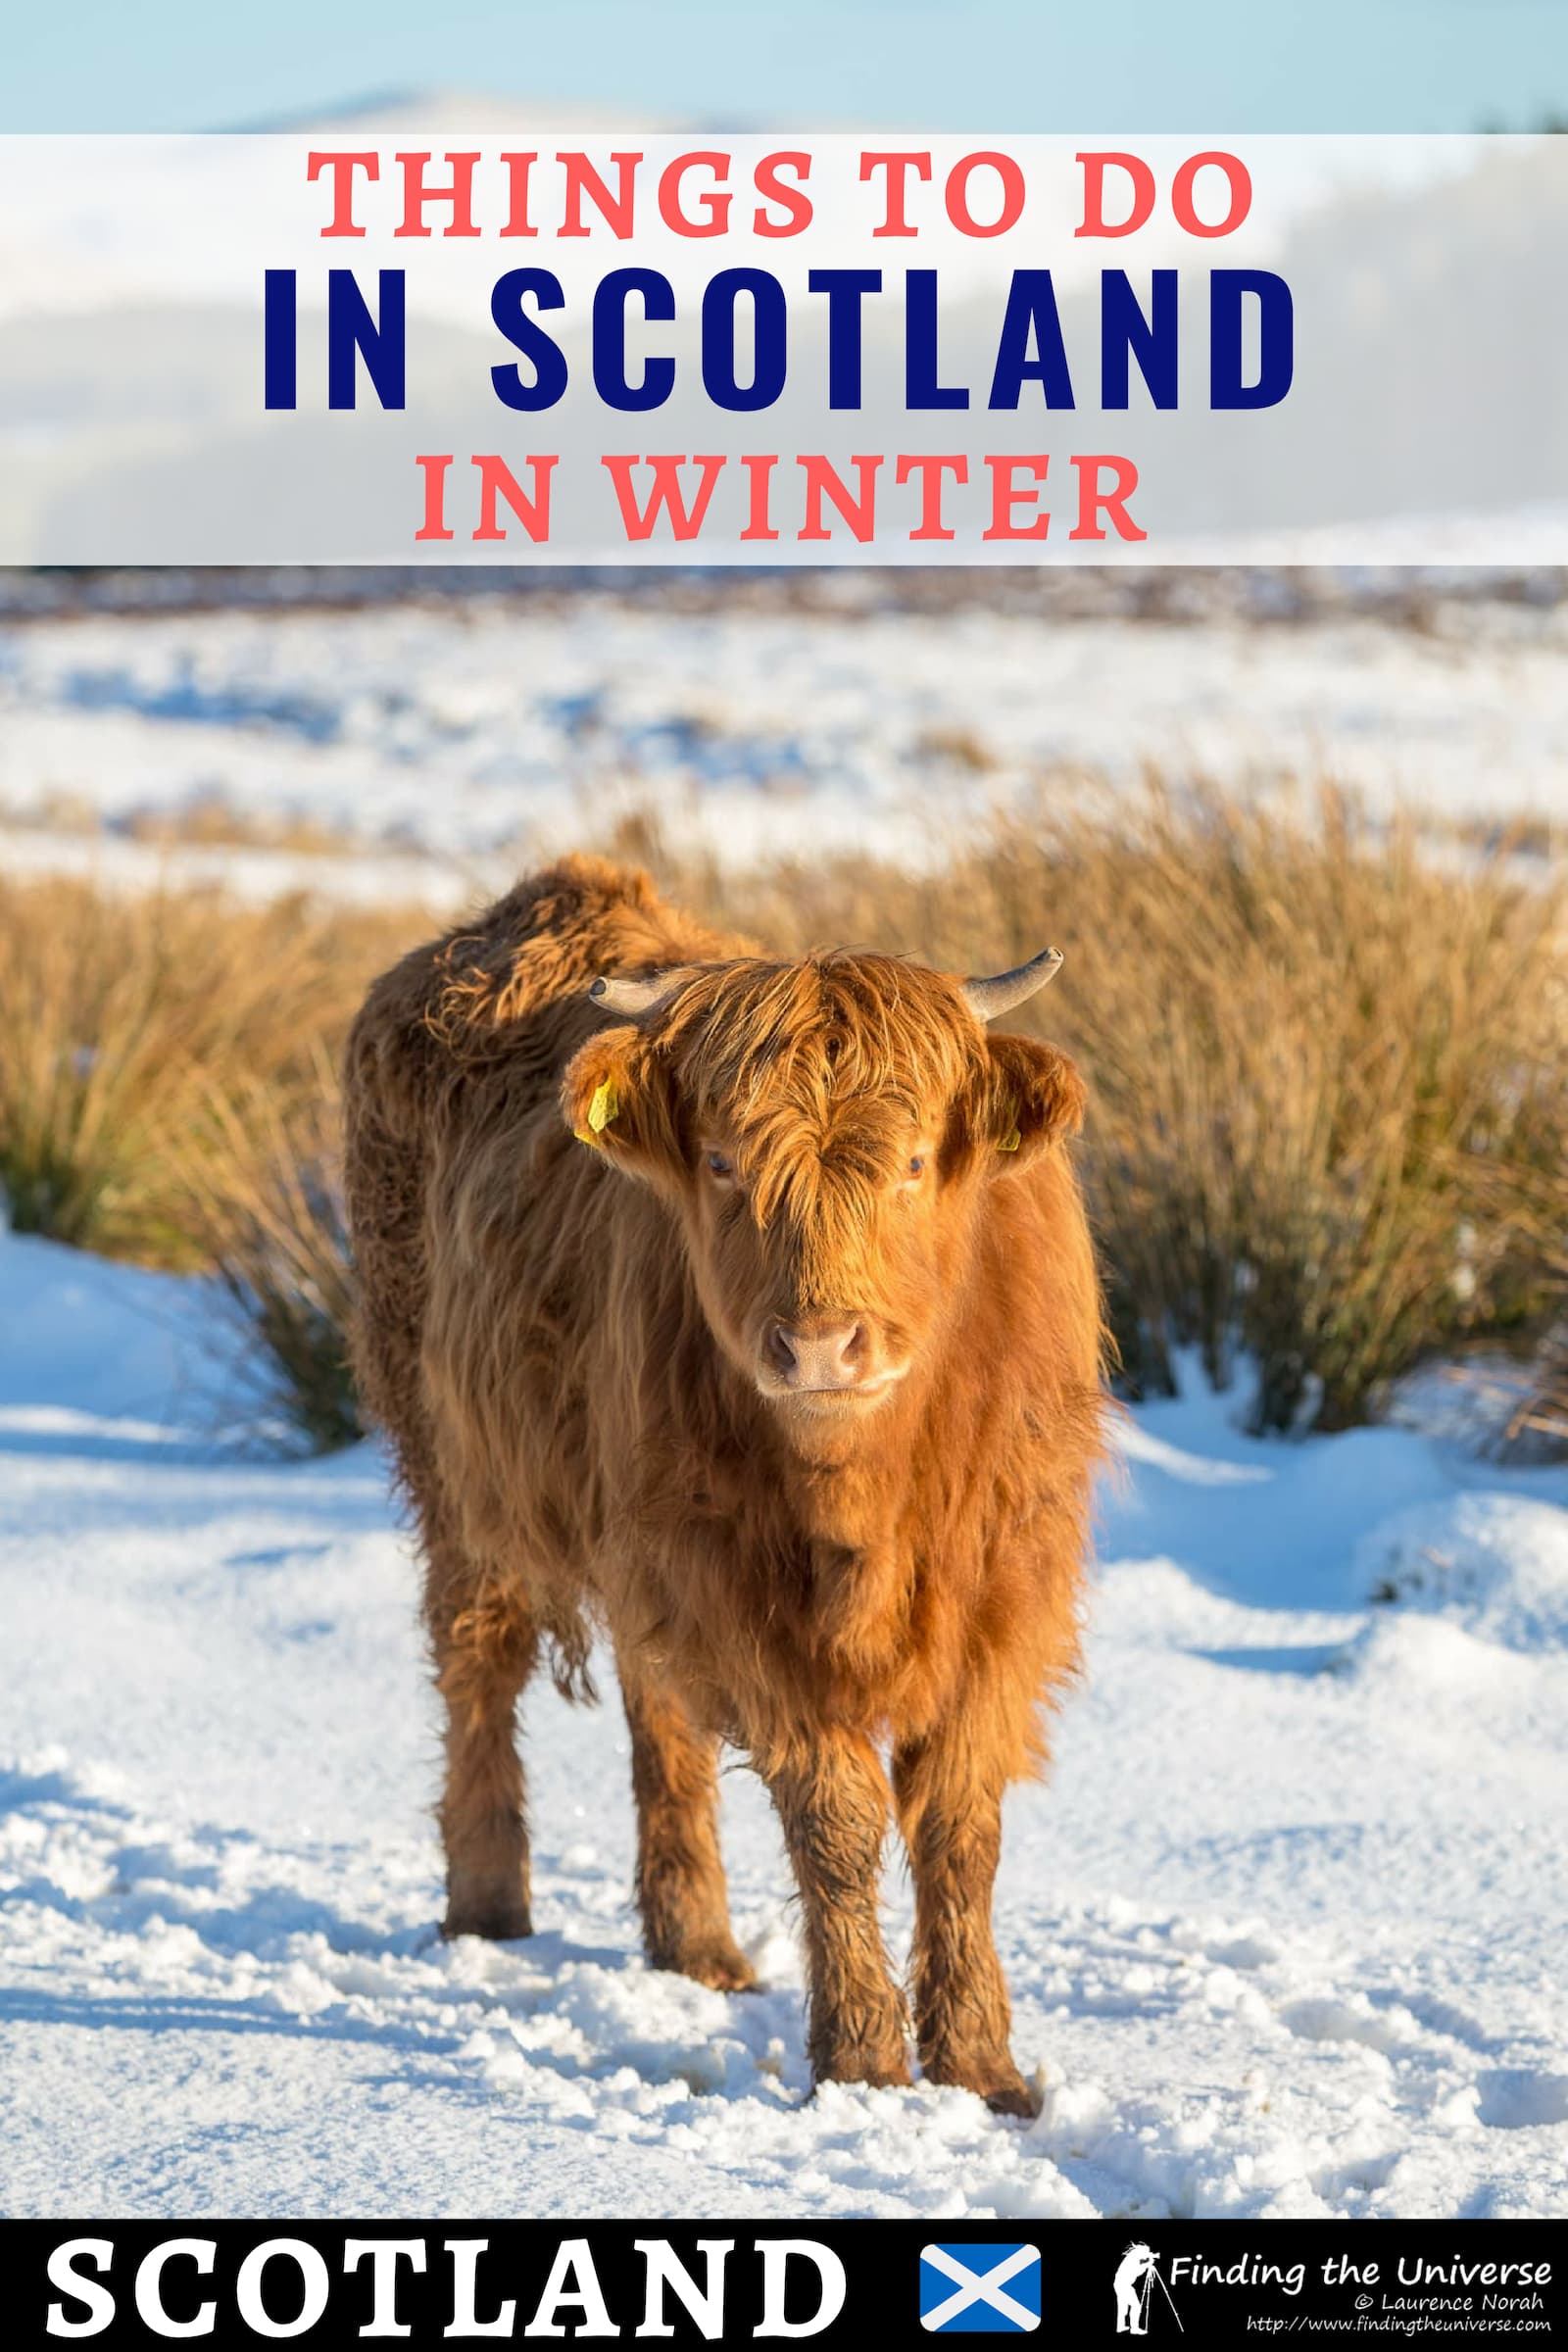 Everything you need to know about visiting Scotland in Winter, from what to do through to what to pack and tips for planning your trip. #travel #scotland #traveltips #uk #winter